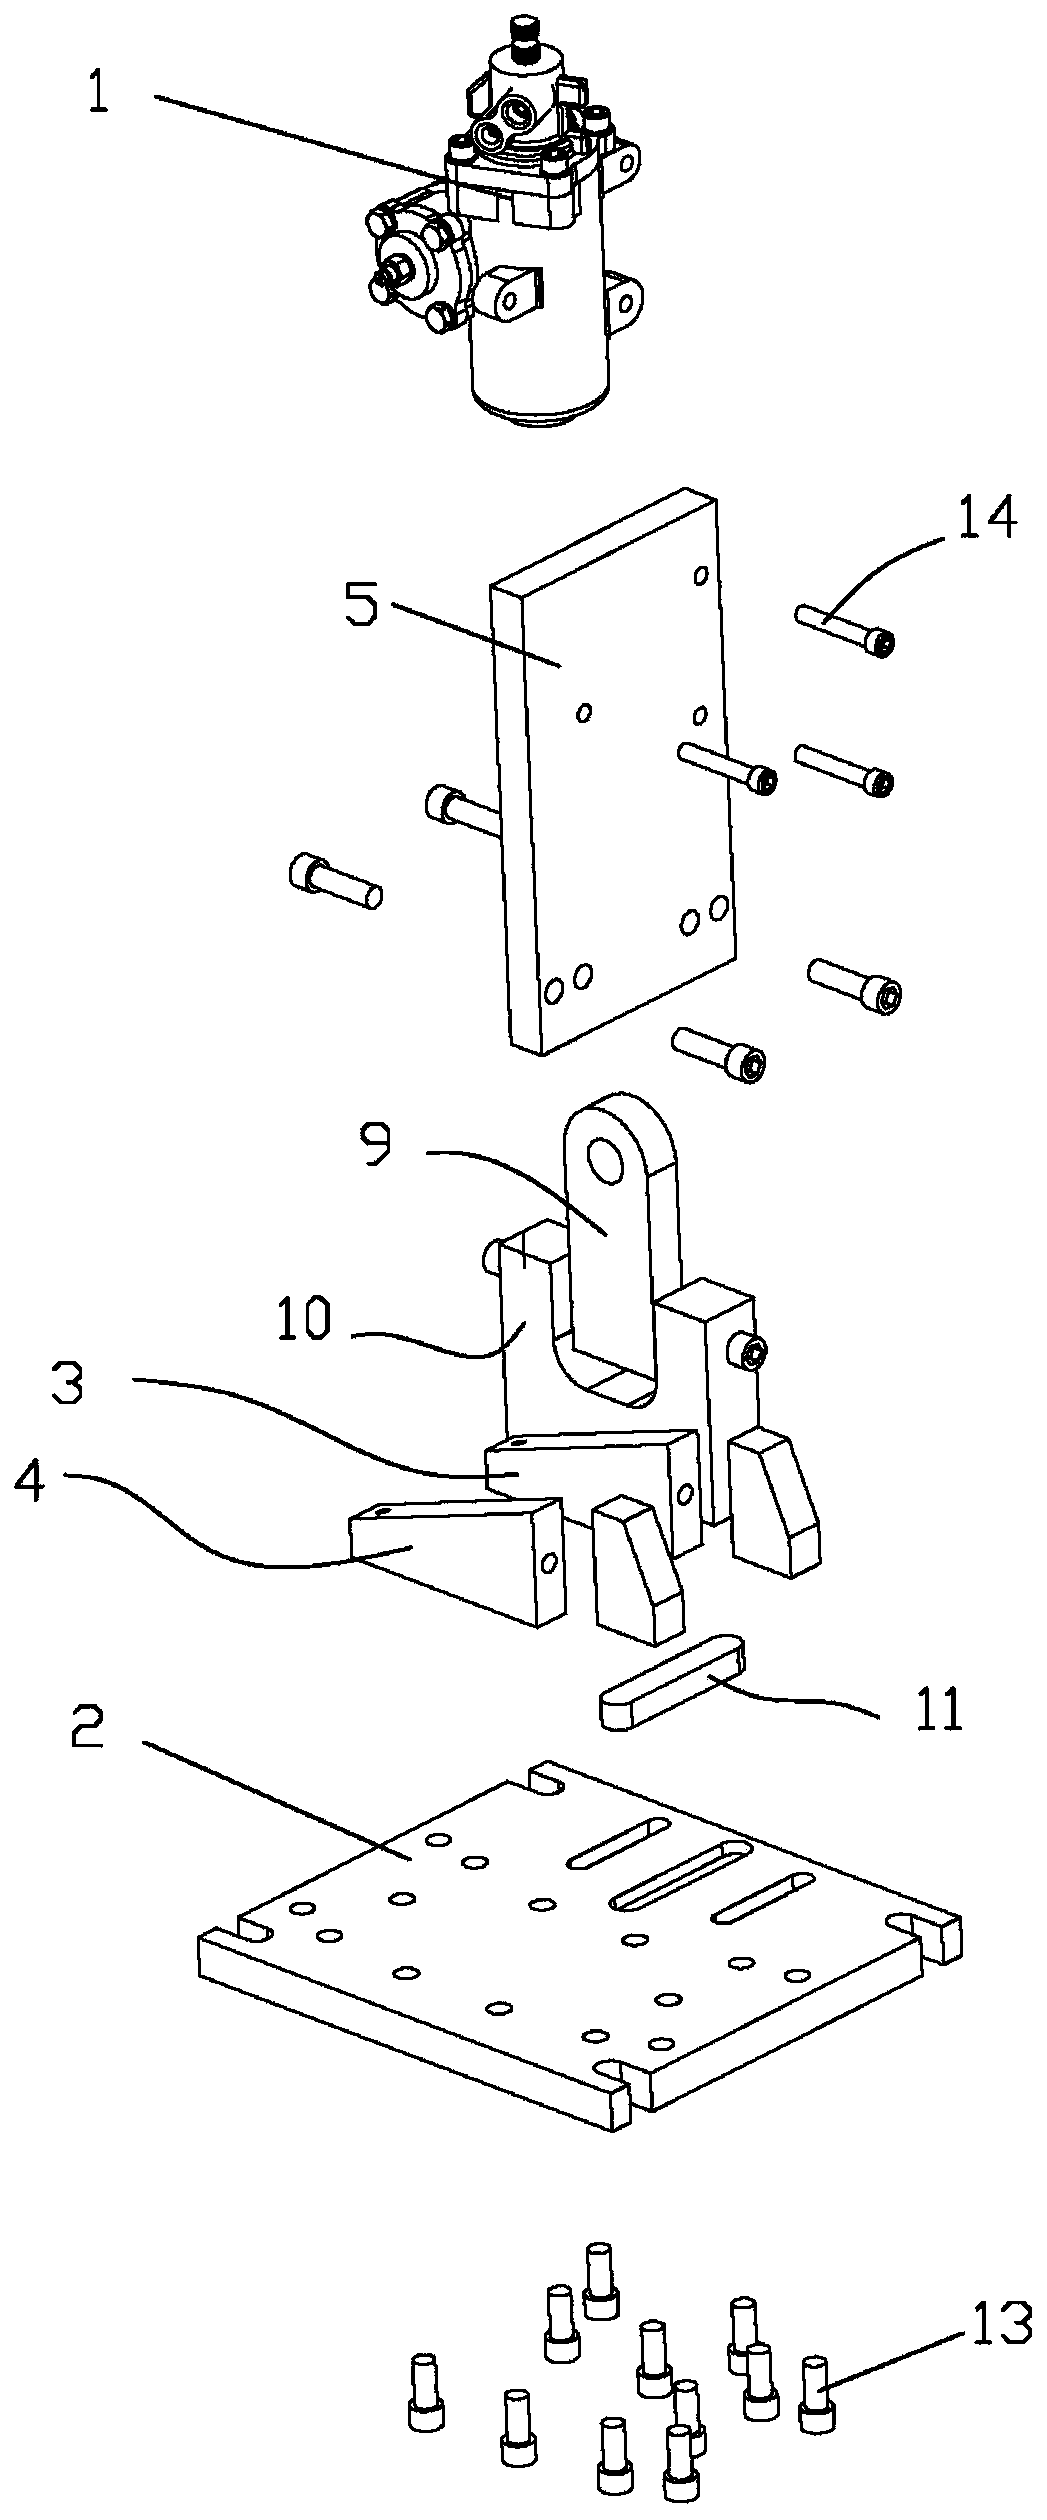 Universal test device for recirculating ball steering gear assembly